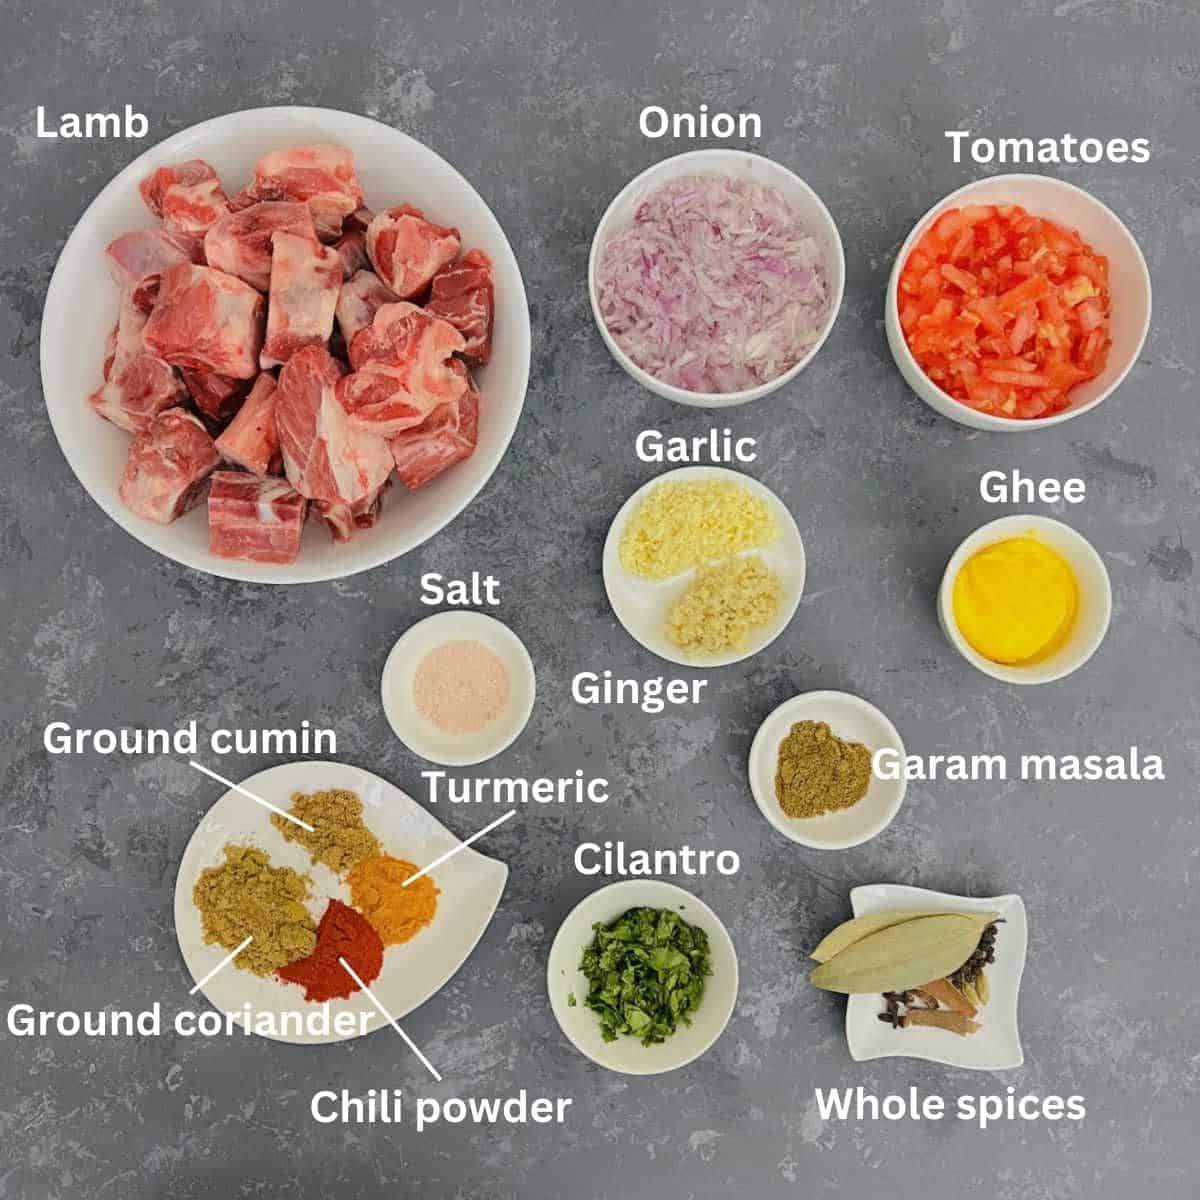 lamb curry ingredients with labels.